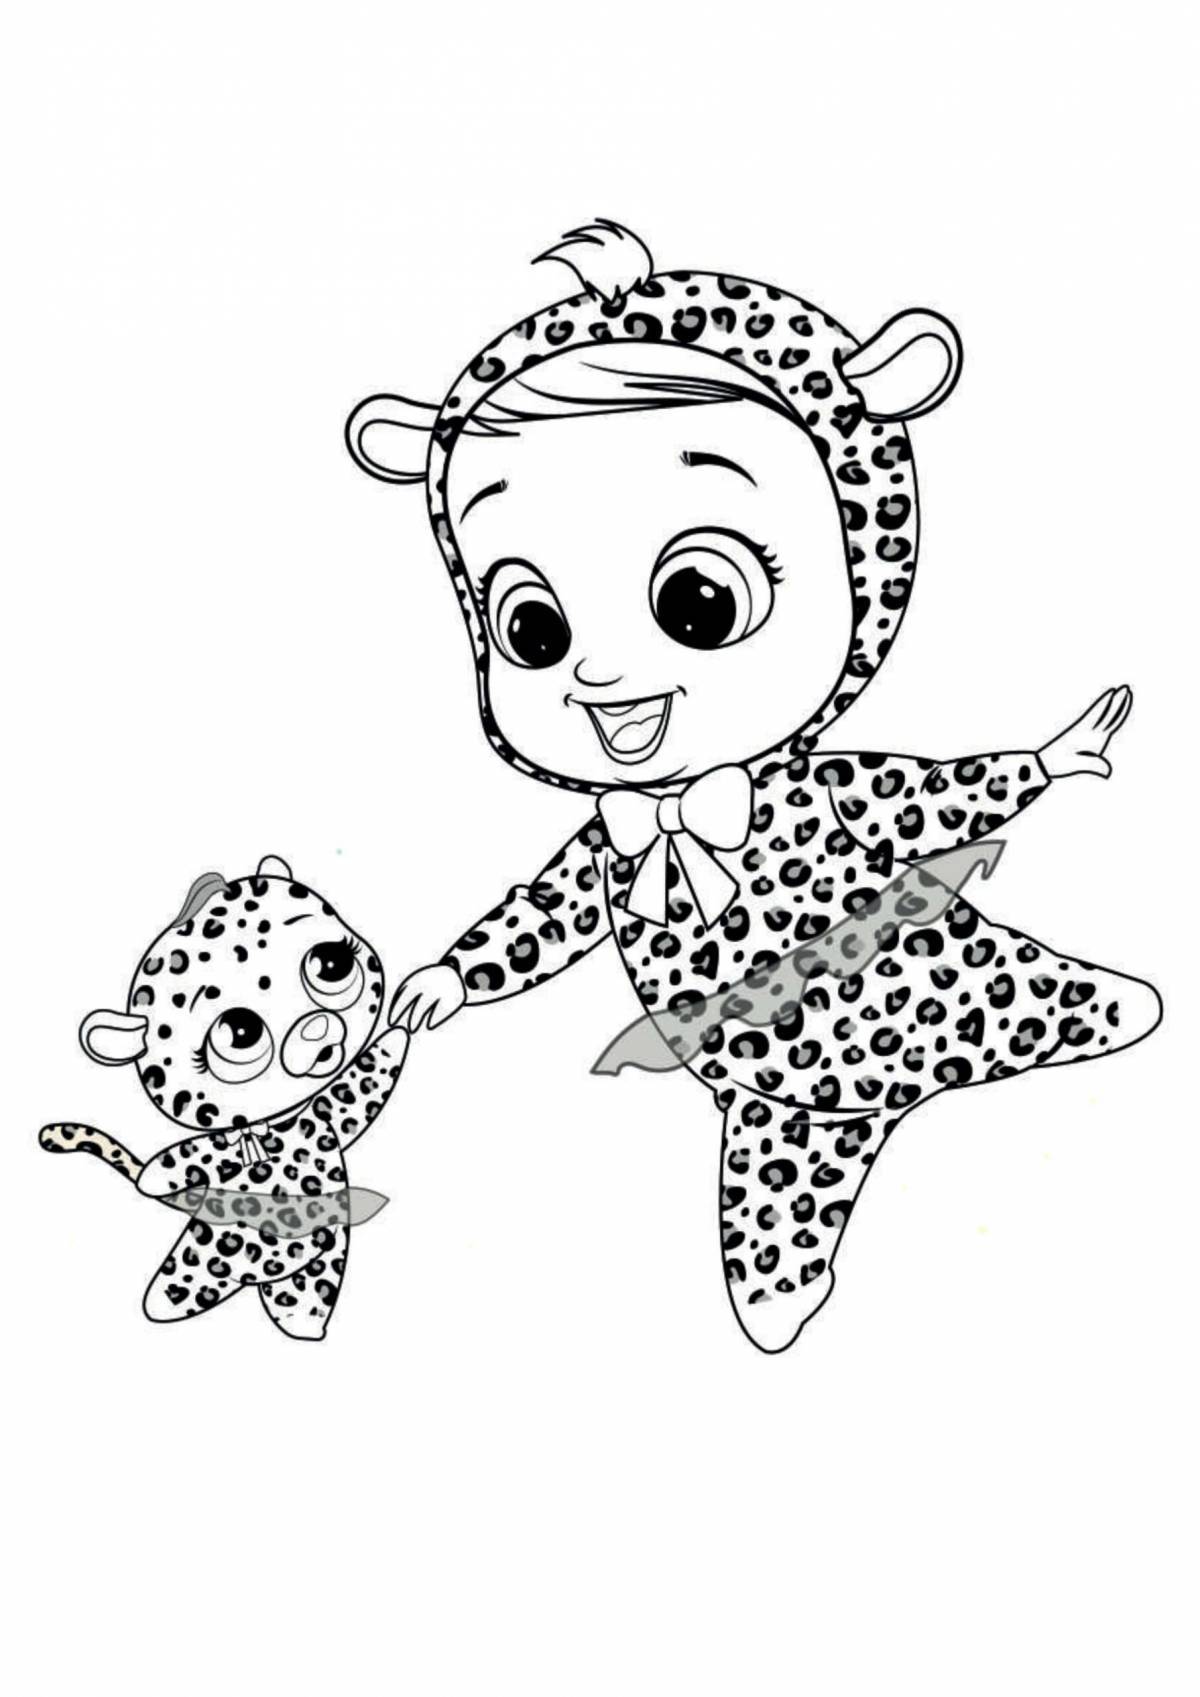 Sparkly children's coloring page edge